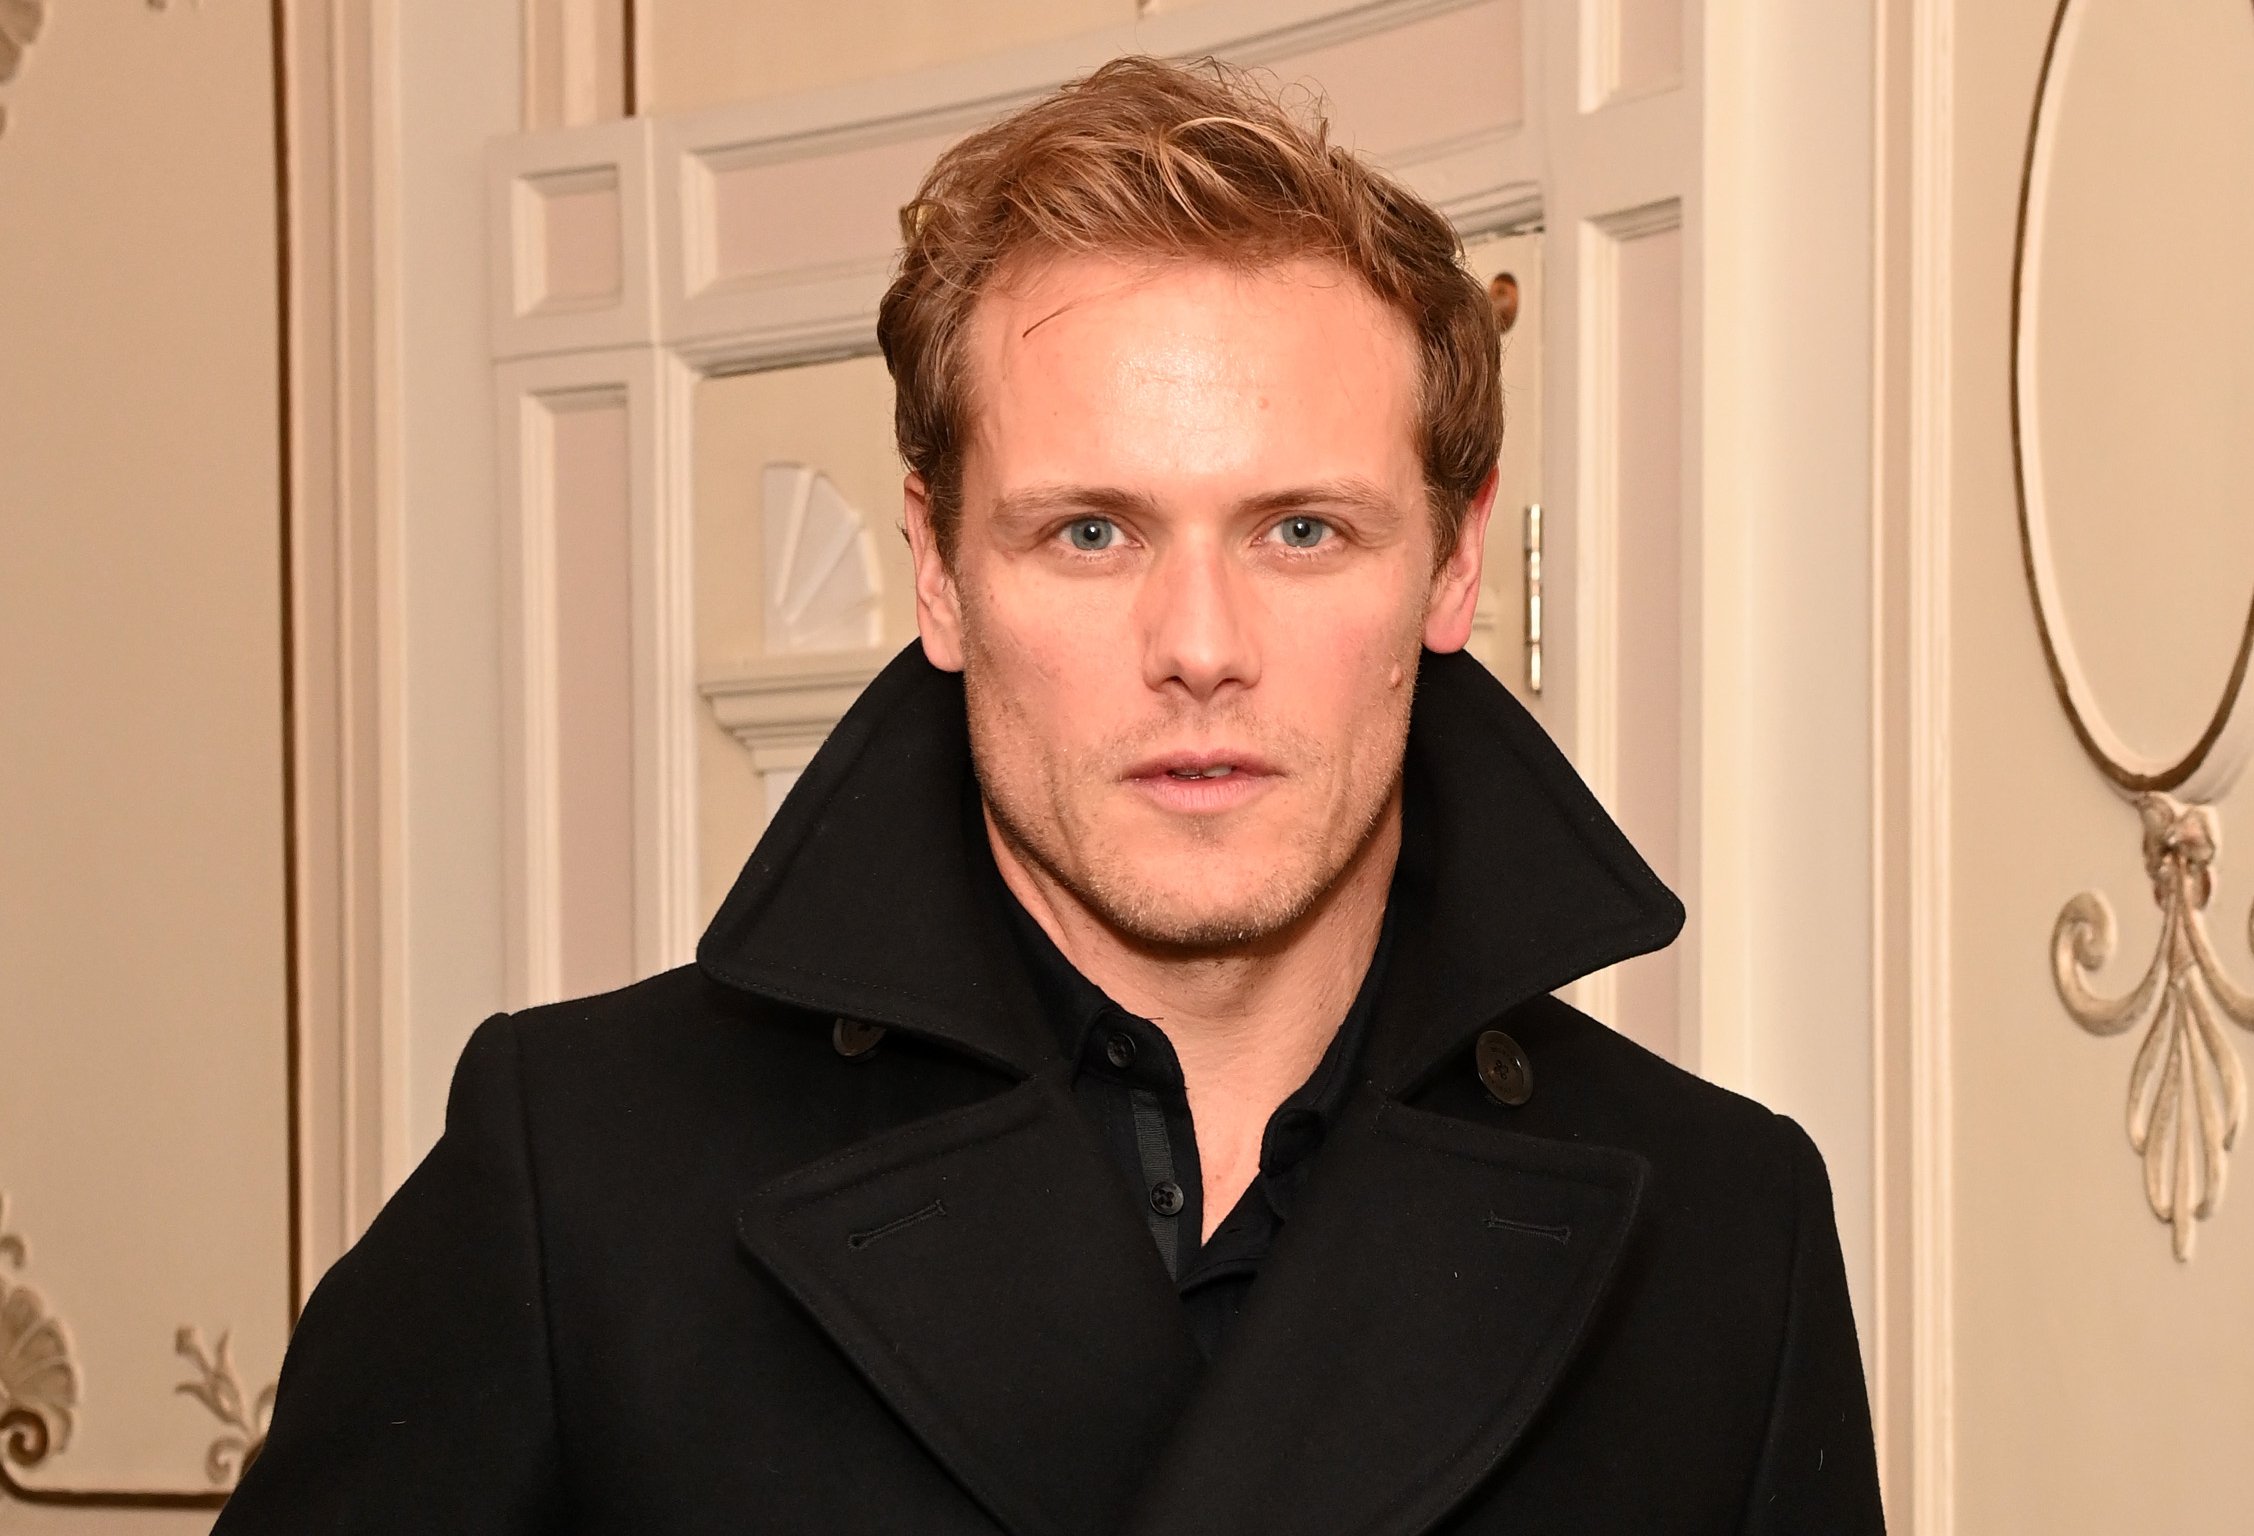 Outlander star Sam Heughan attends the Opening Night performance of "Rumi The Musical" by Dana Al Fardan at the London Coliseum on November 23, 2021 in London, England